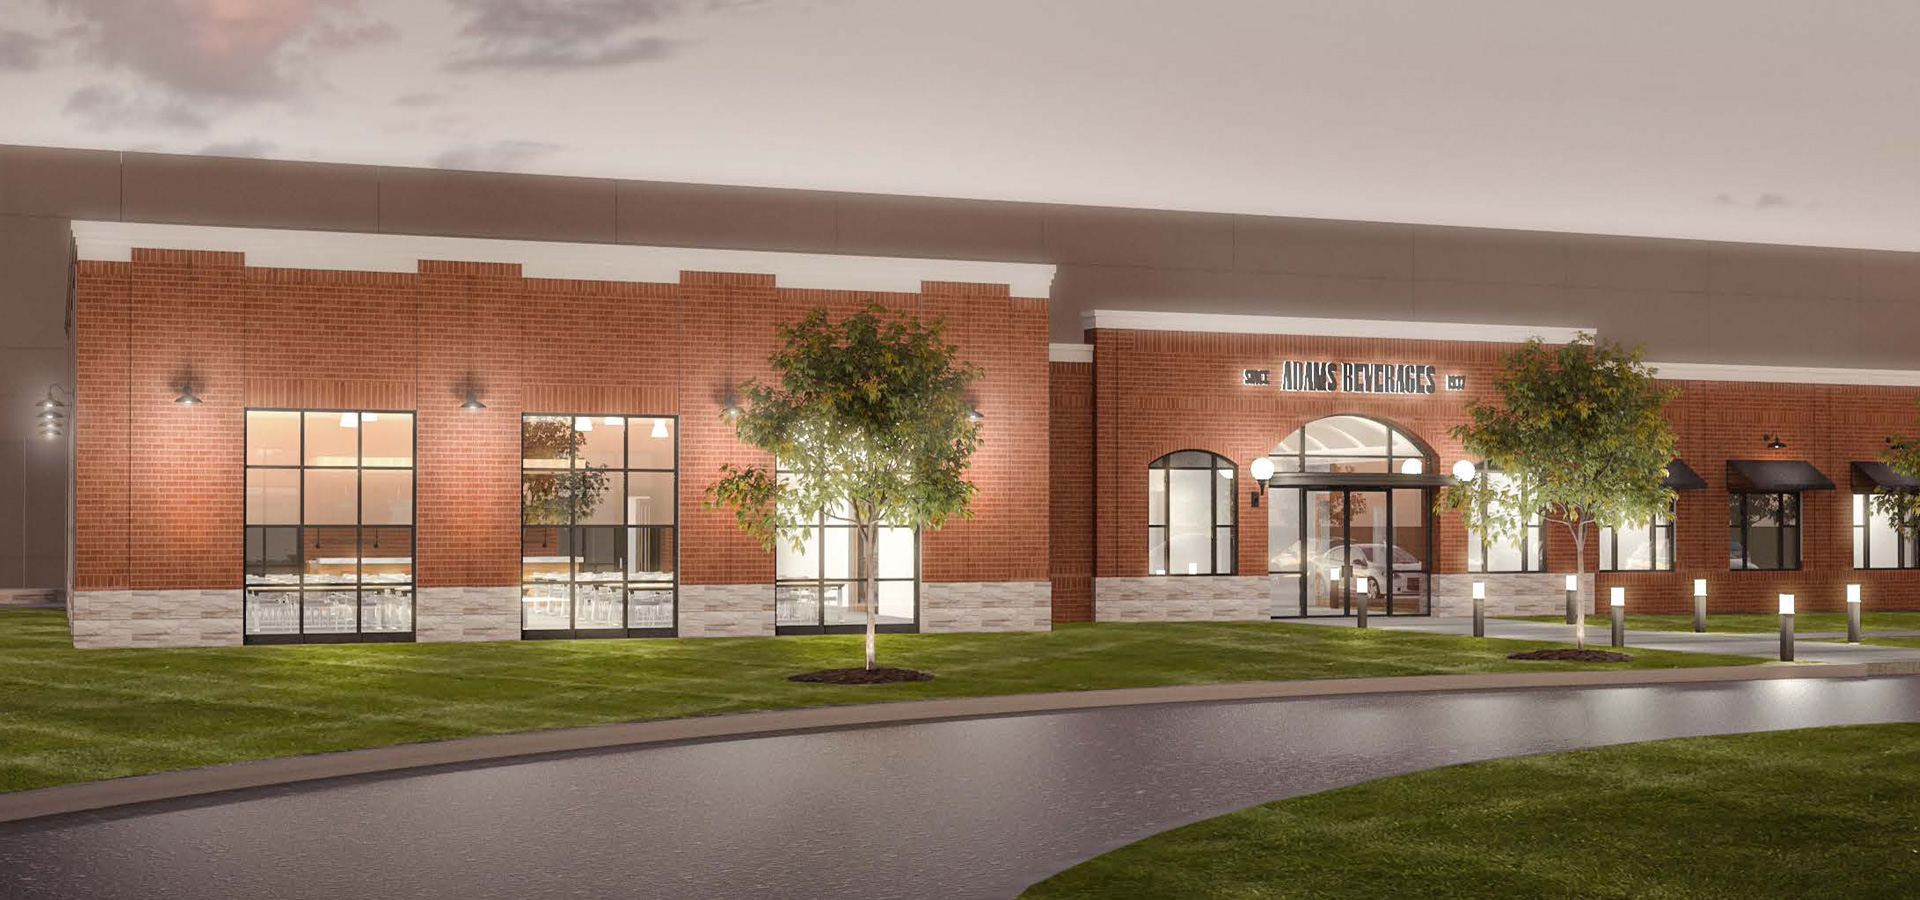 Rendering of Adams Beverages distribution facility to be completed in Opelika, Alabama